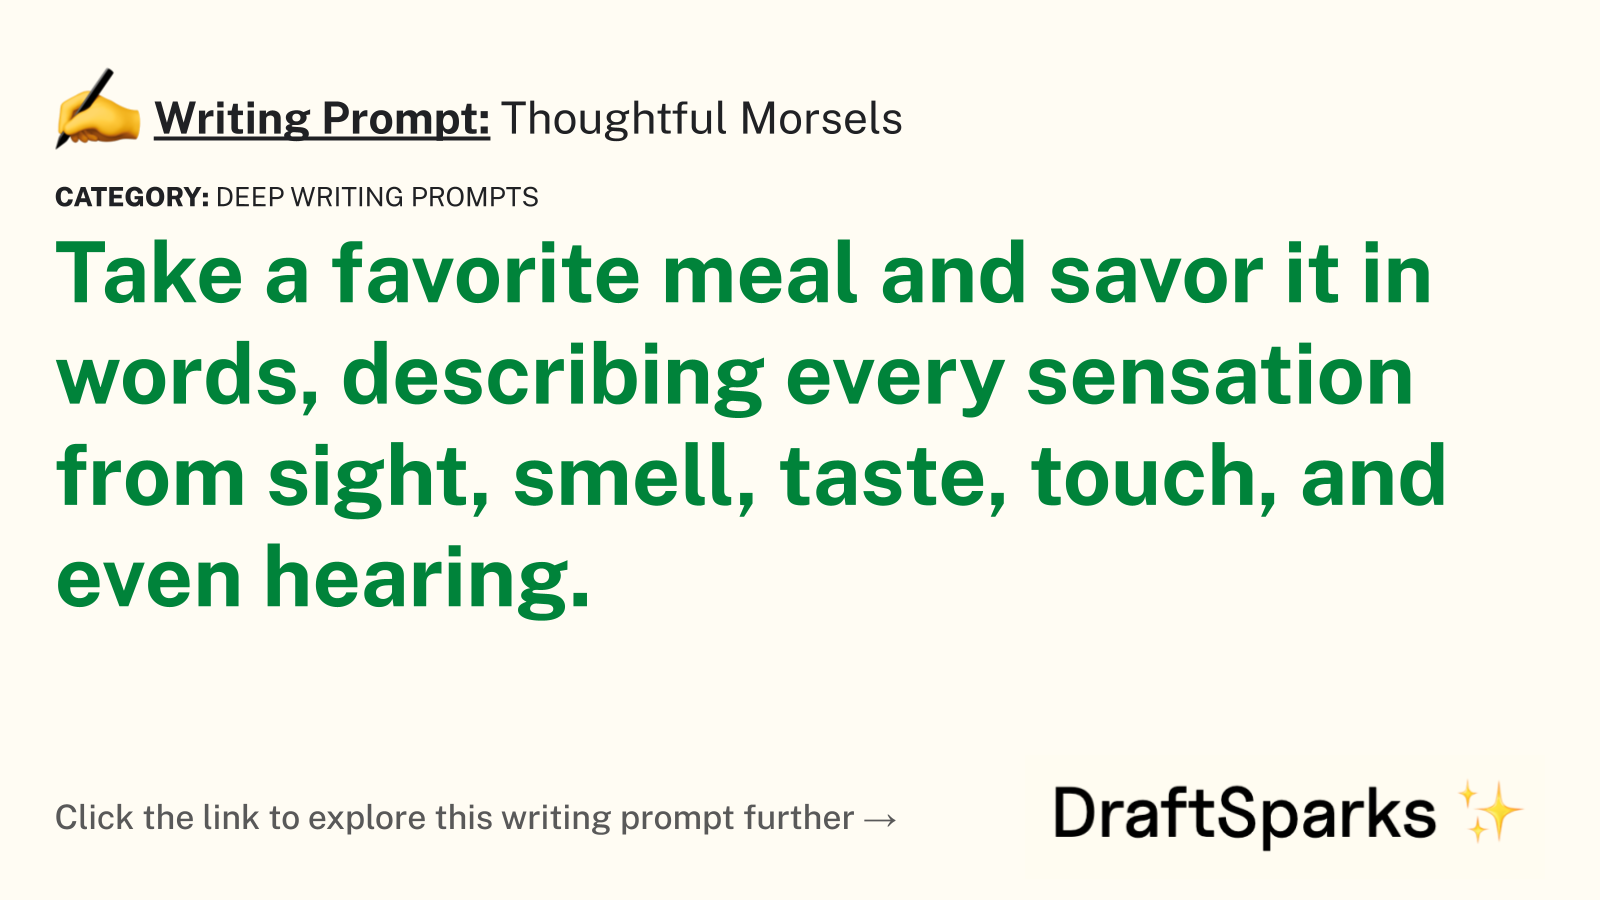 Thoughtful Morsels